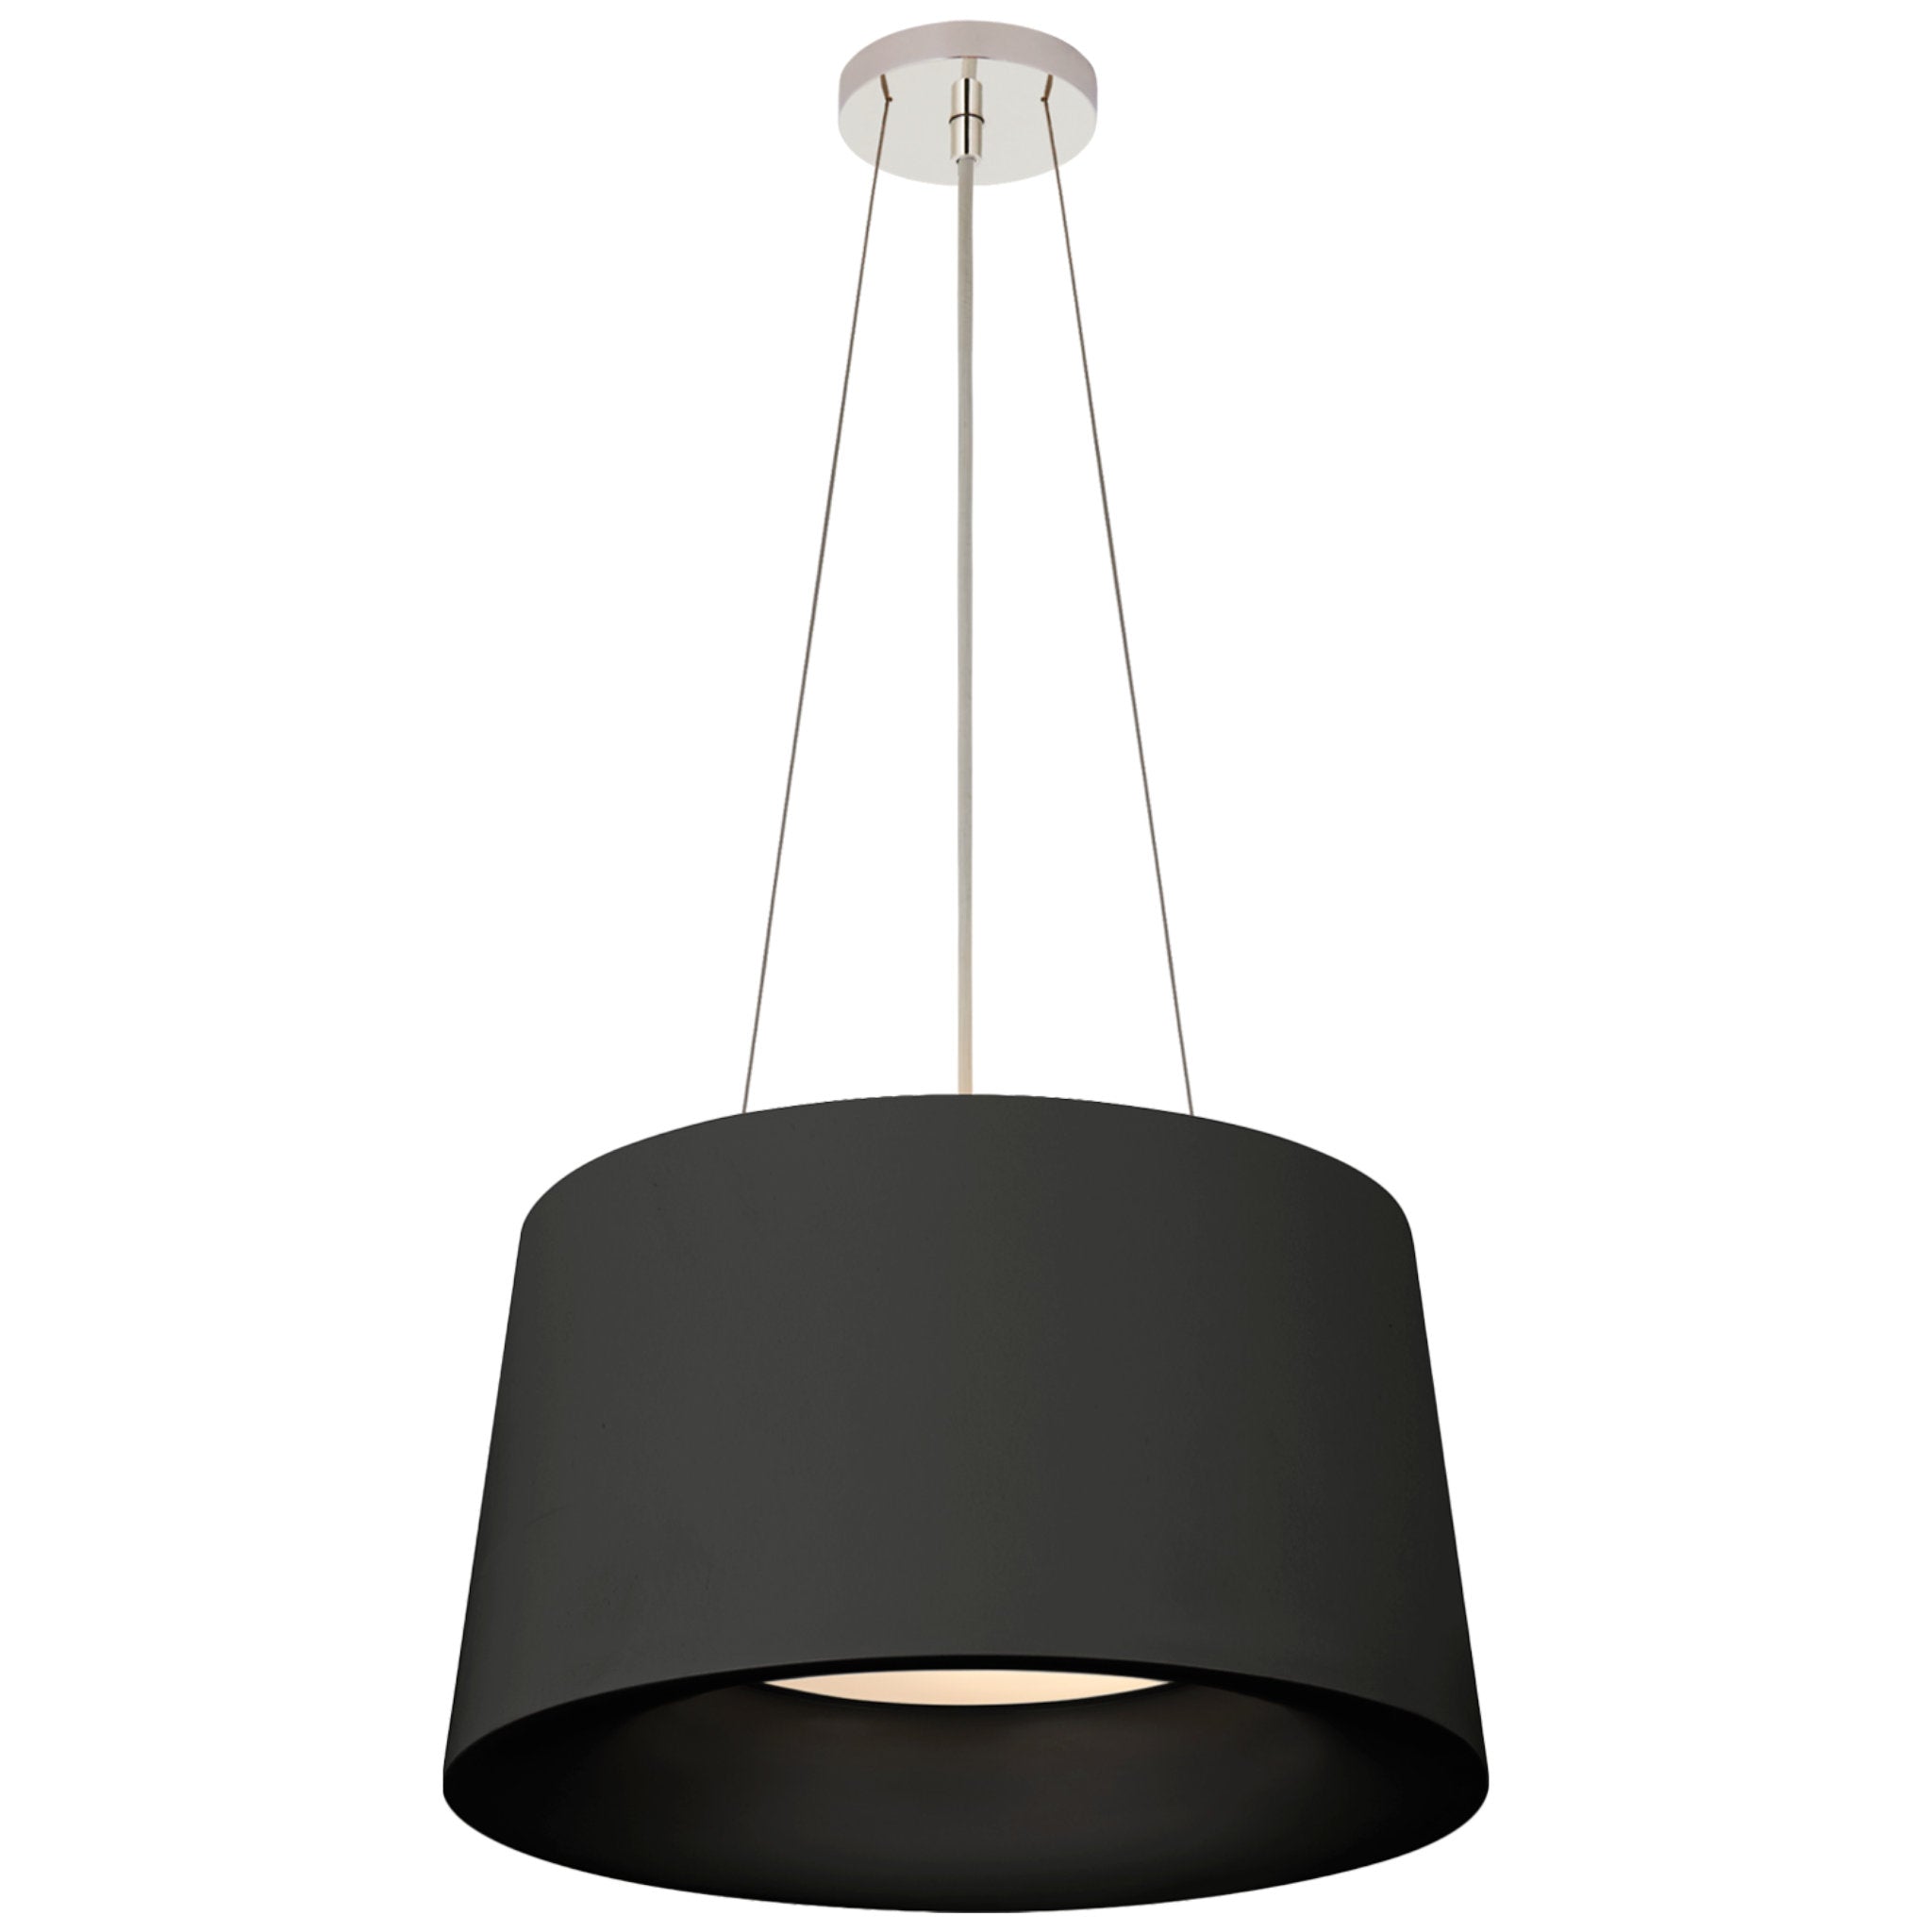 Barbara Barry Halo Small Hanging Shade in Matte Black